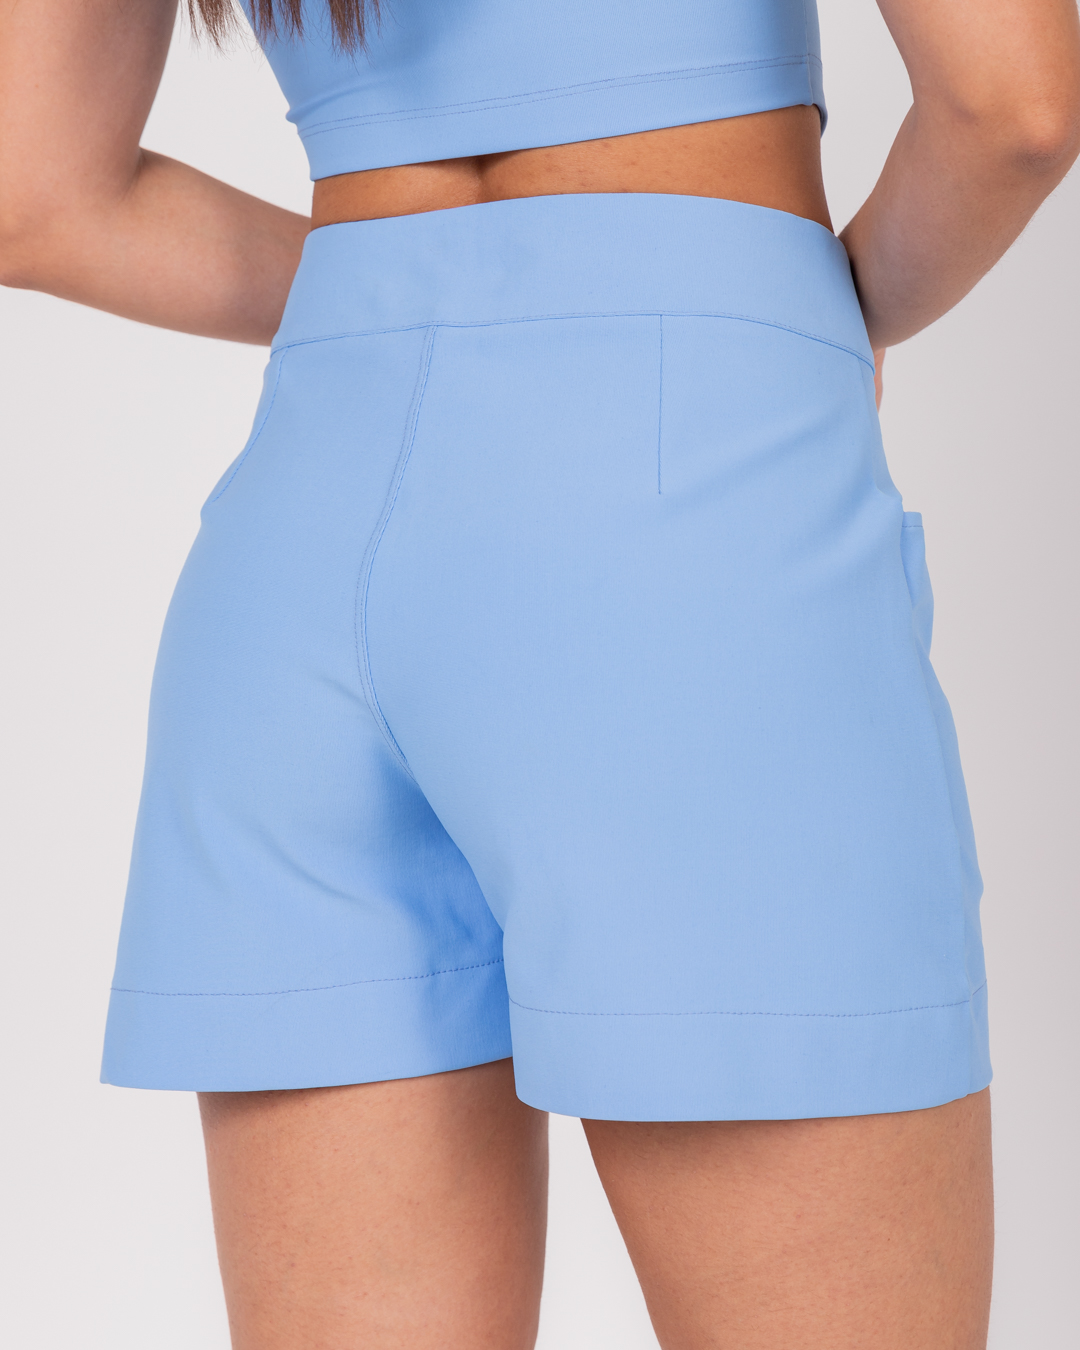 Miss Misses - Short Miss Misses With Pocket and Blue Button - 54048002